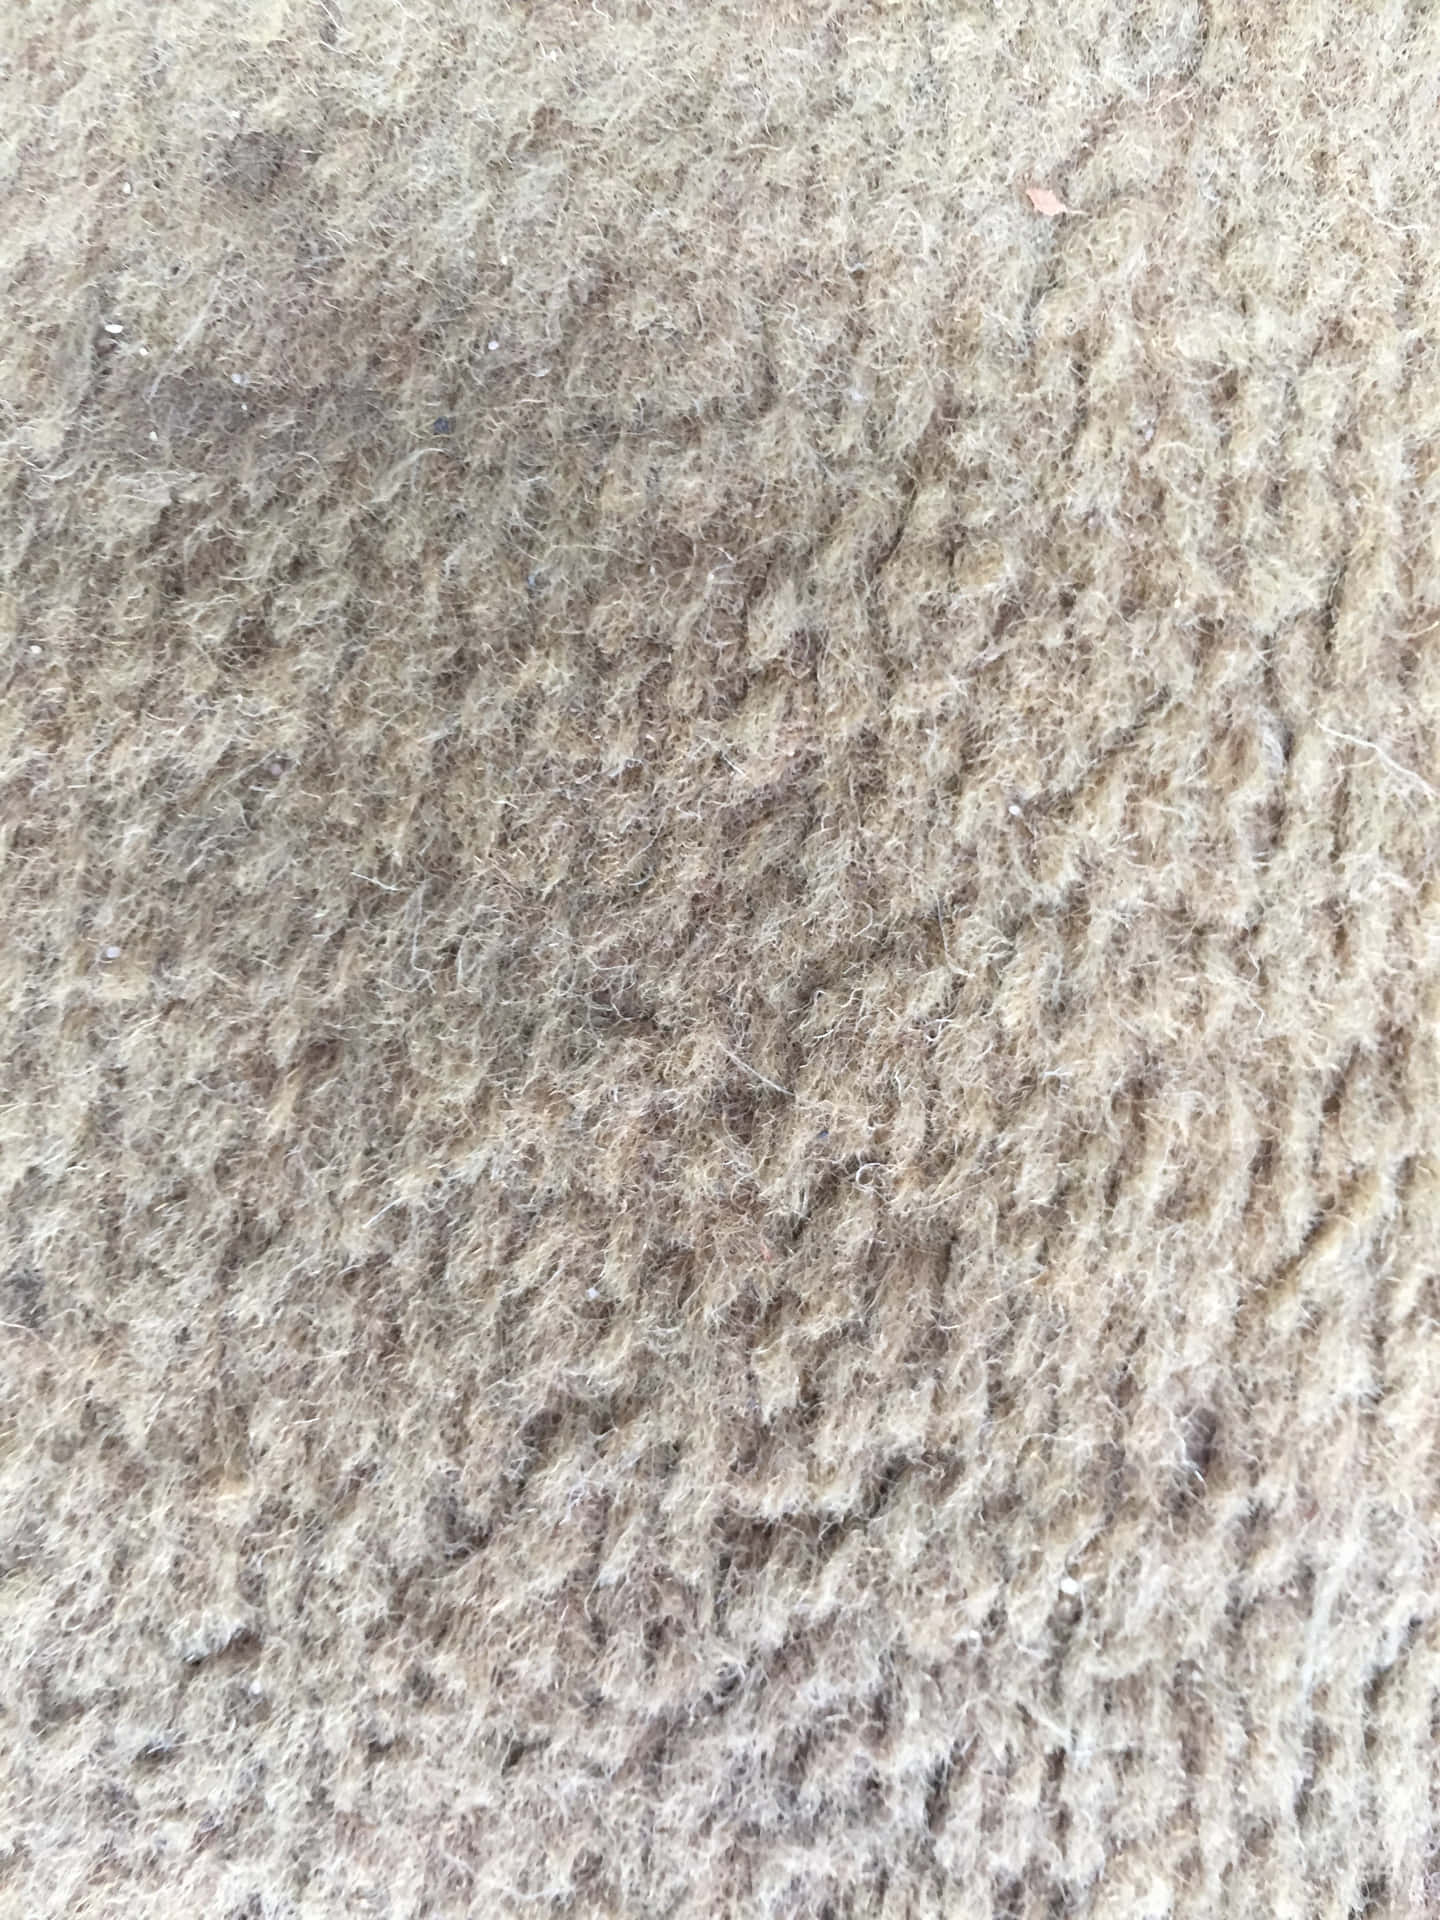 Luxurious brown carpeting with a unique textured pattern